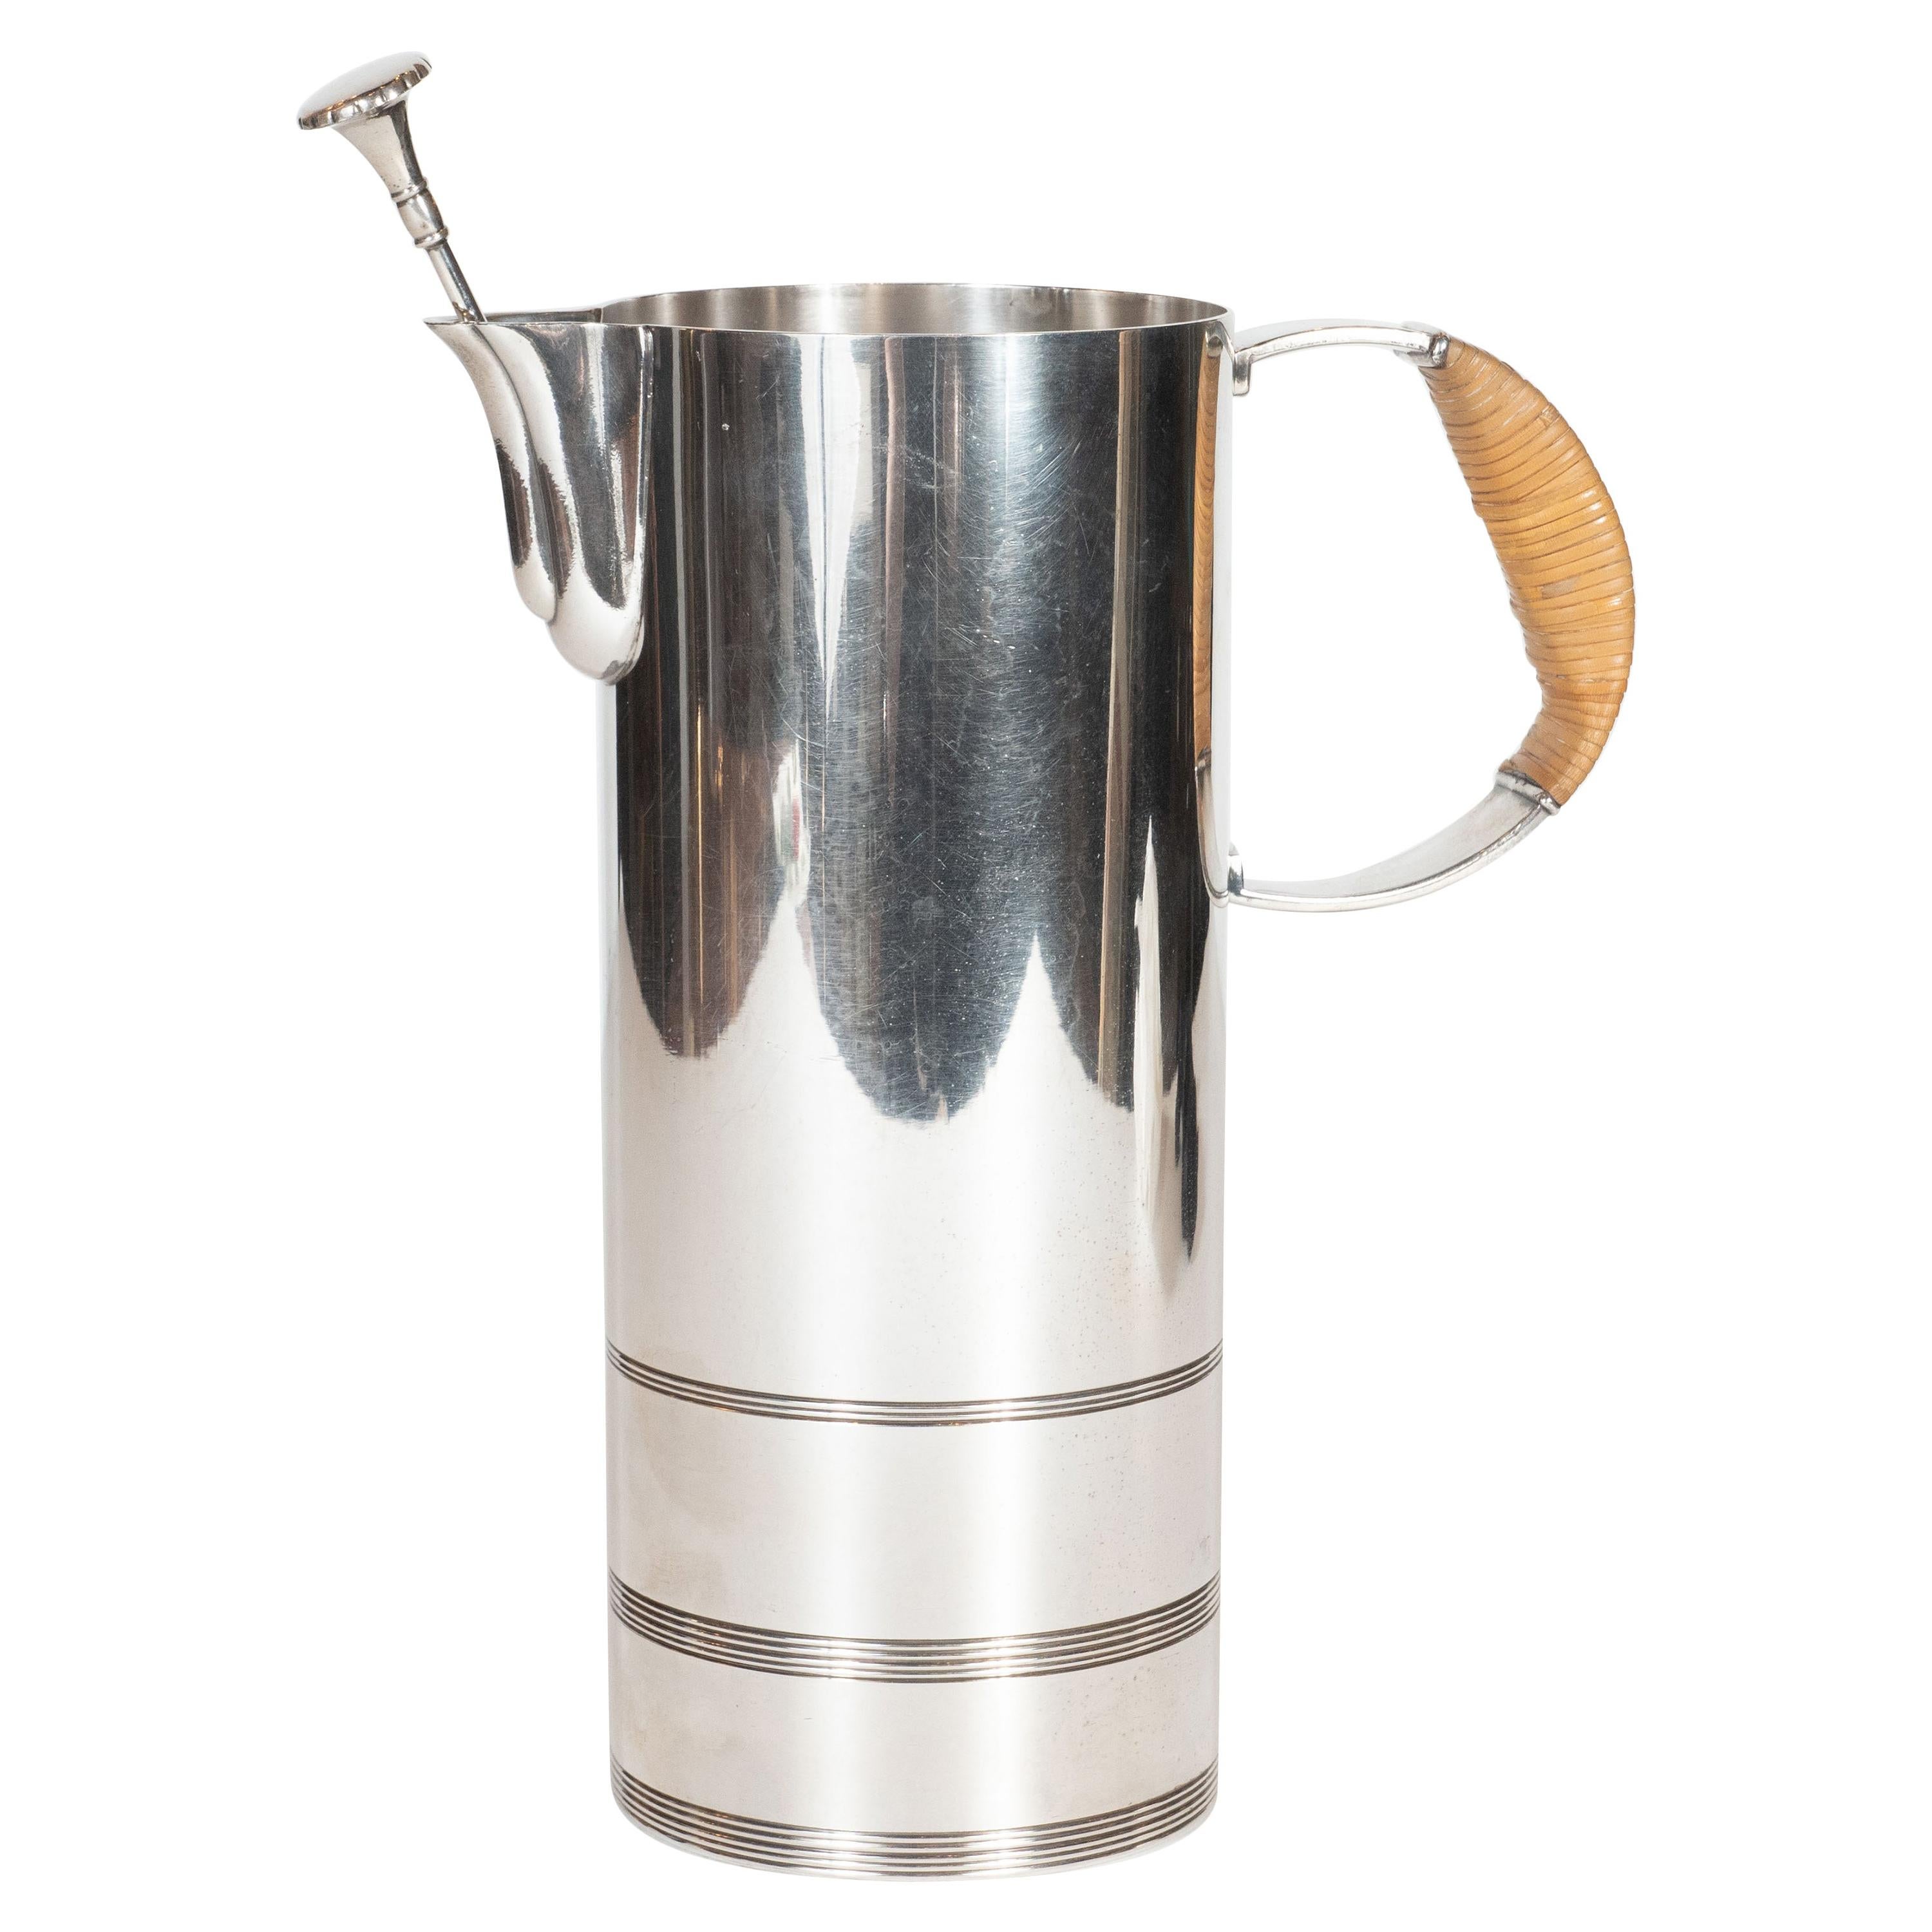 Art Deco Silver Plate Pitcher by Lurelle Guild for The International Silver Co.